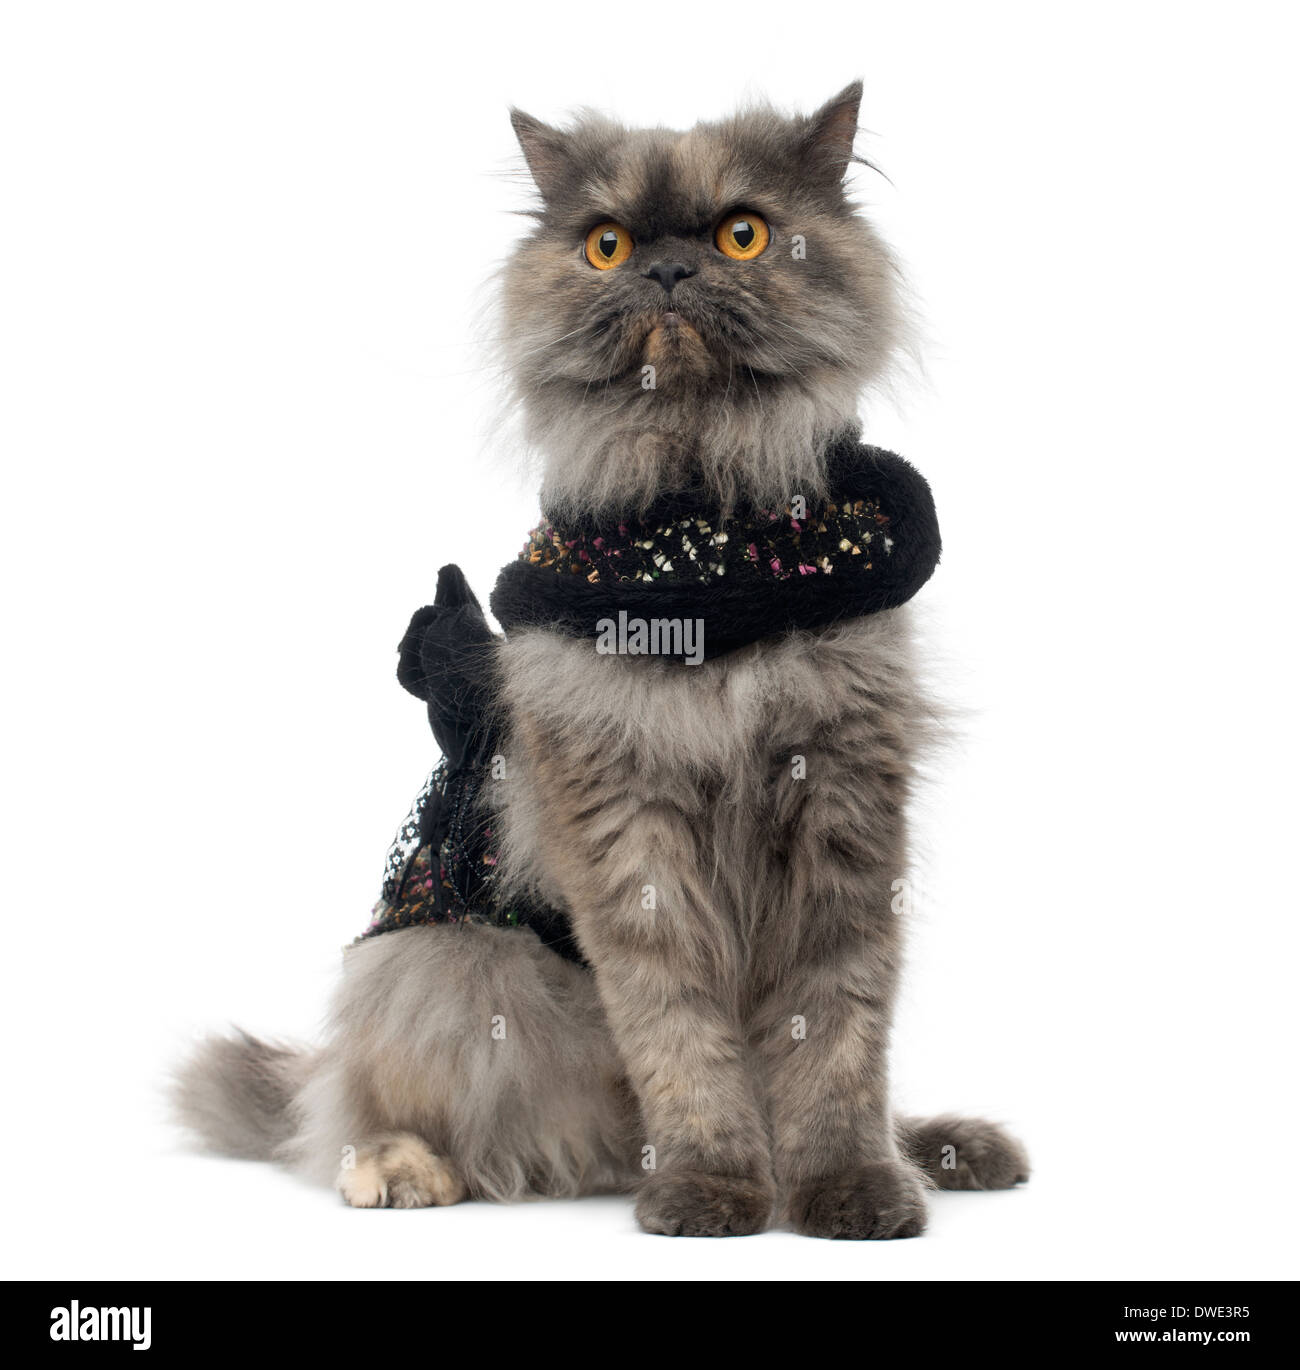 Grumpy Persian cat wearing a shiny harness, sitting, in front of white background Stock Photo